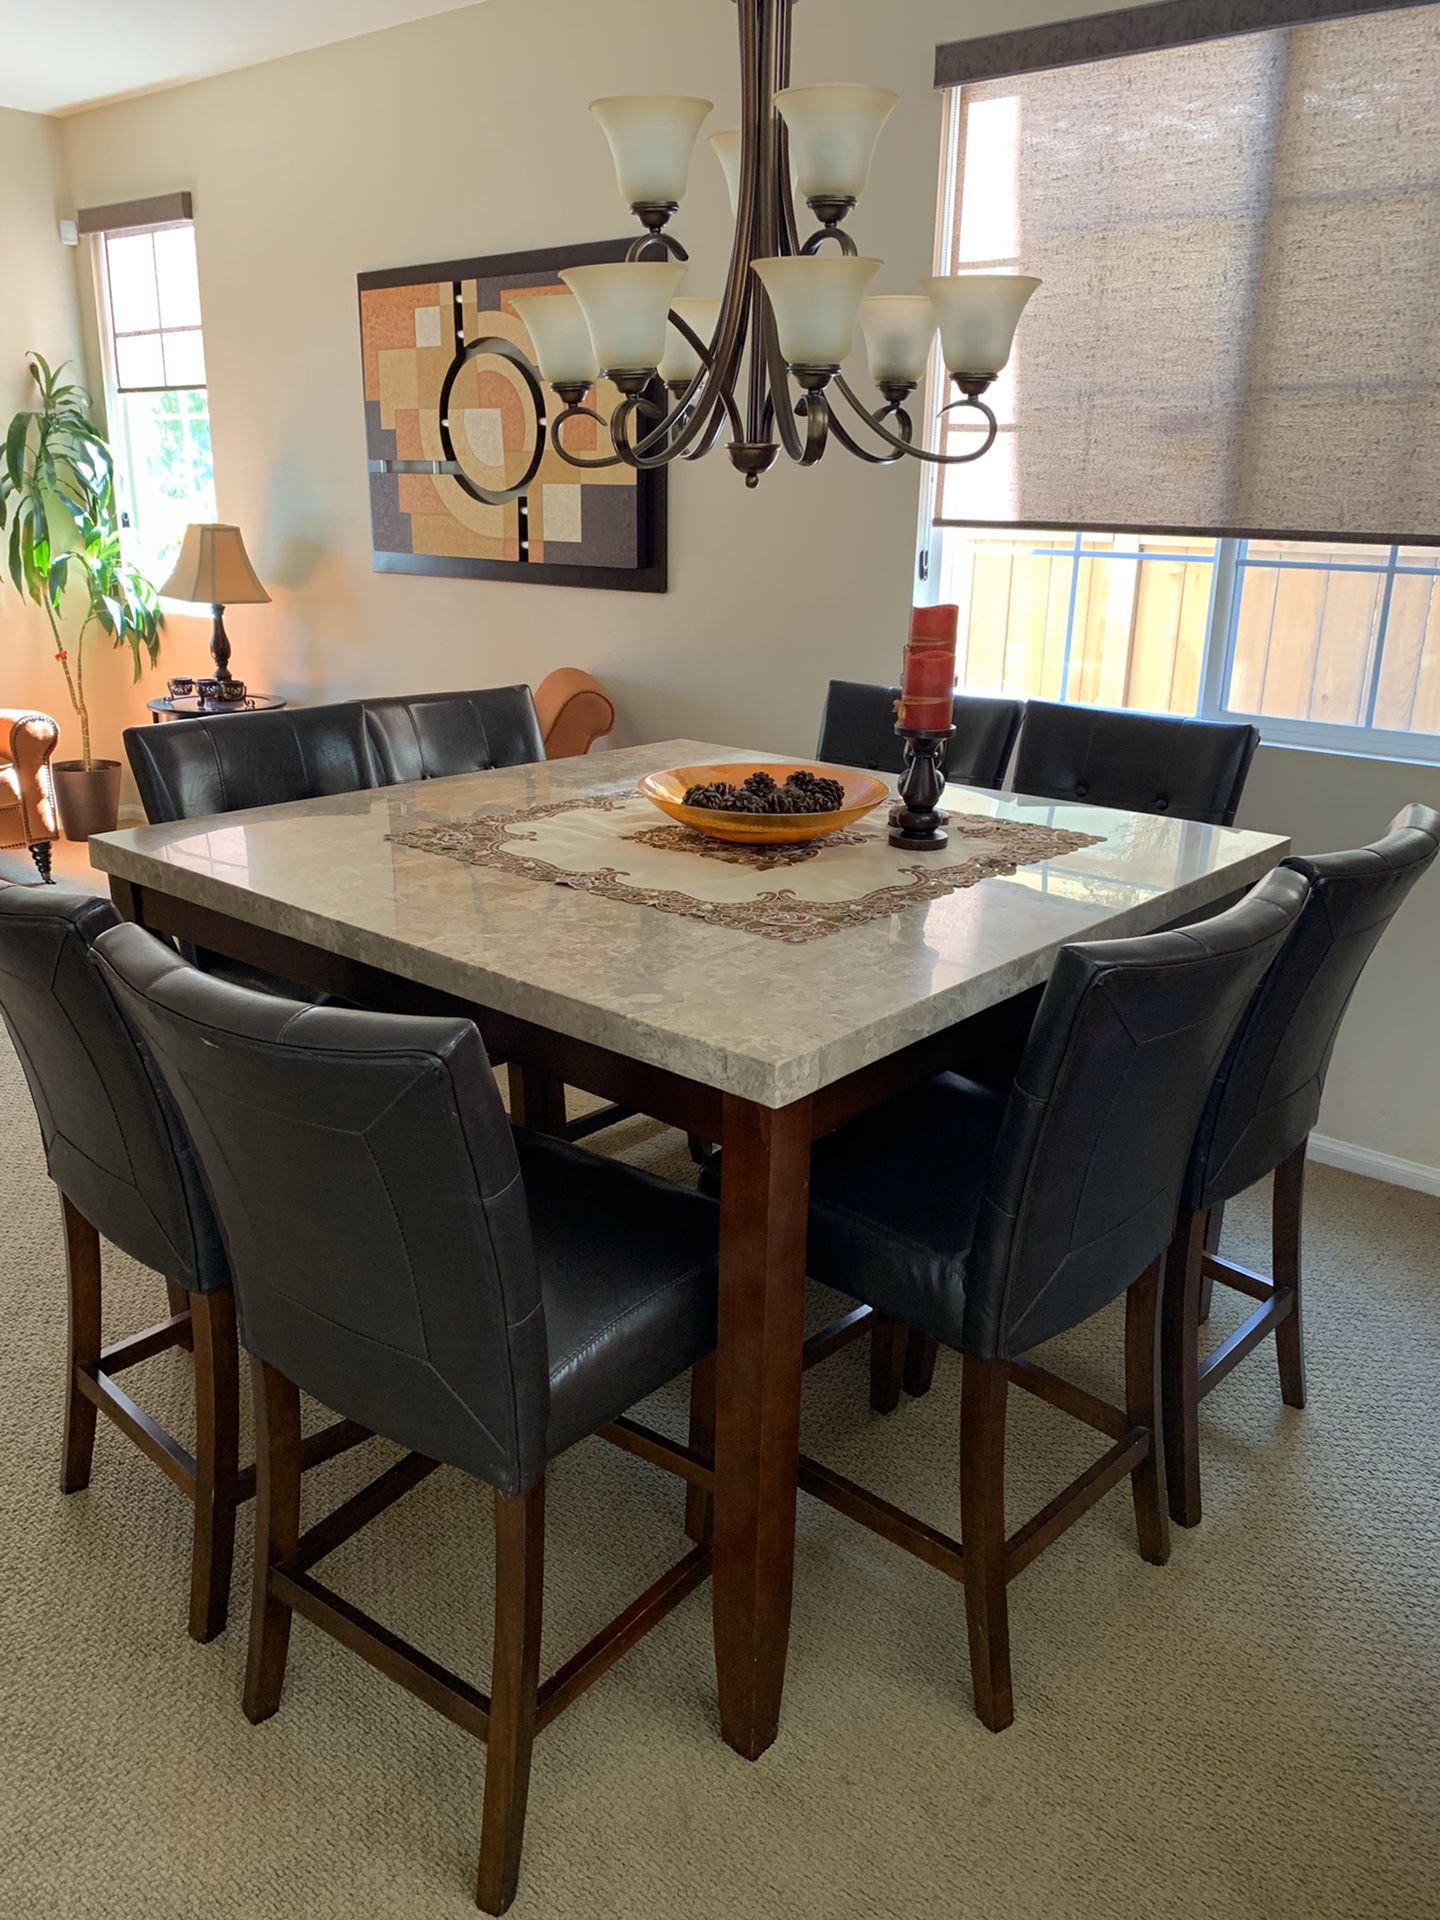 Dining set with marble table